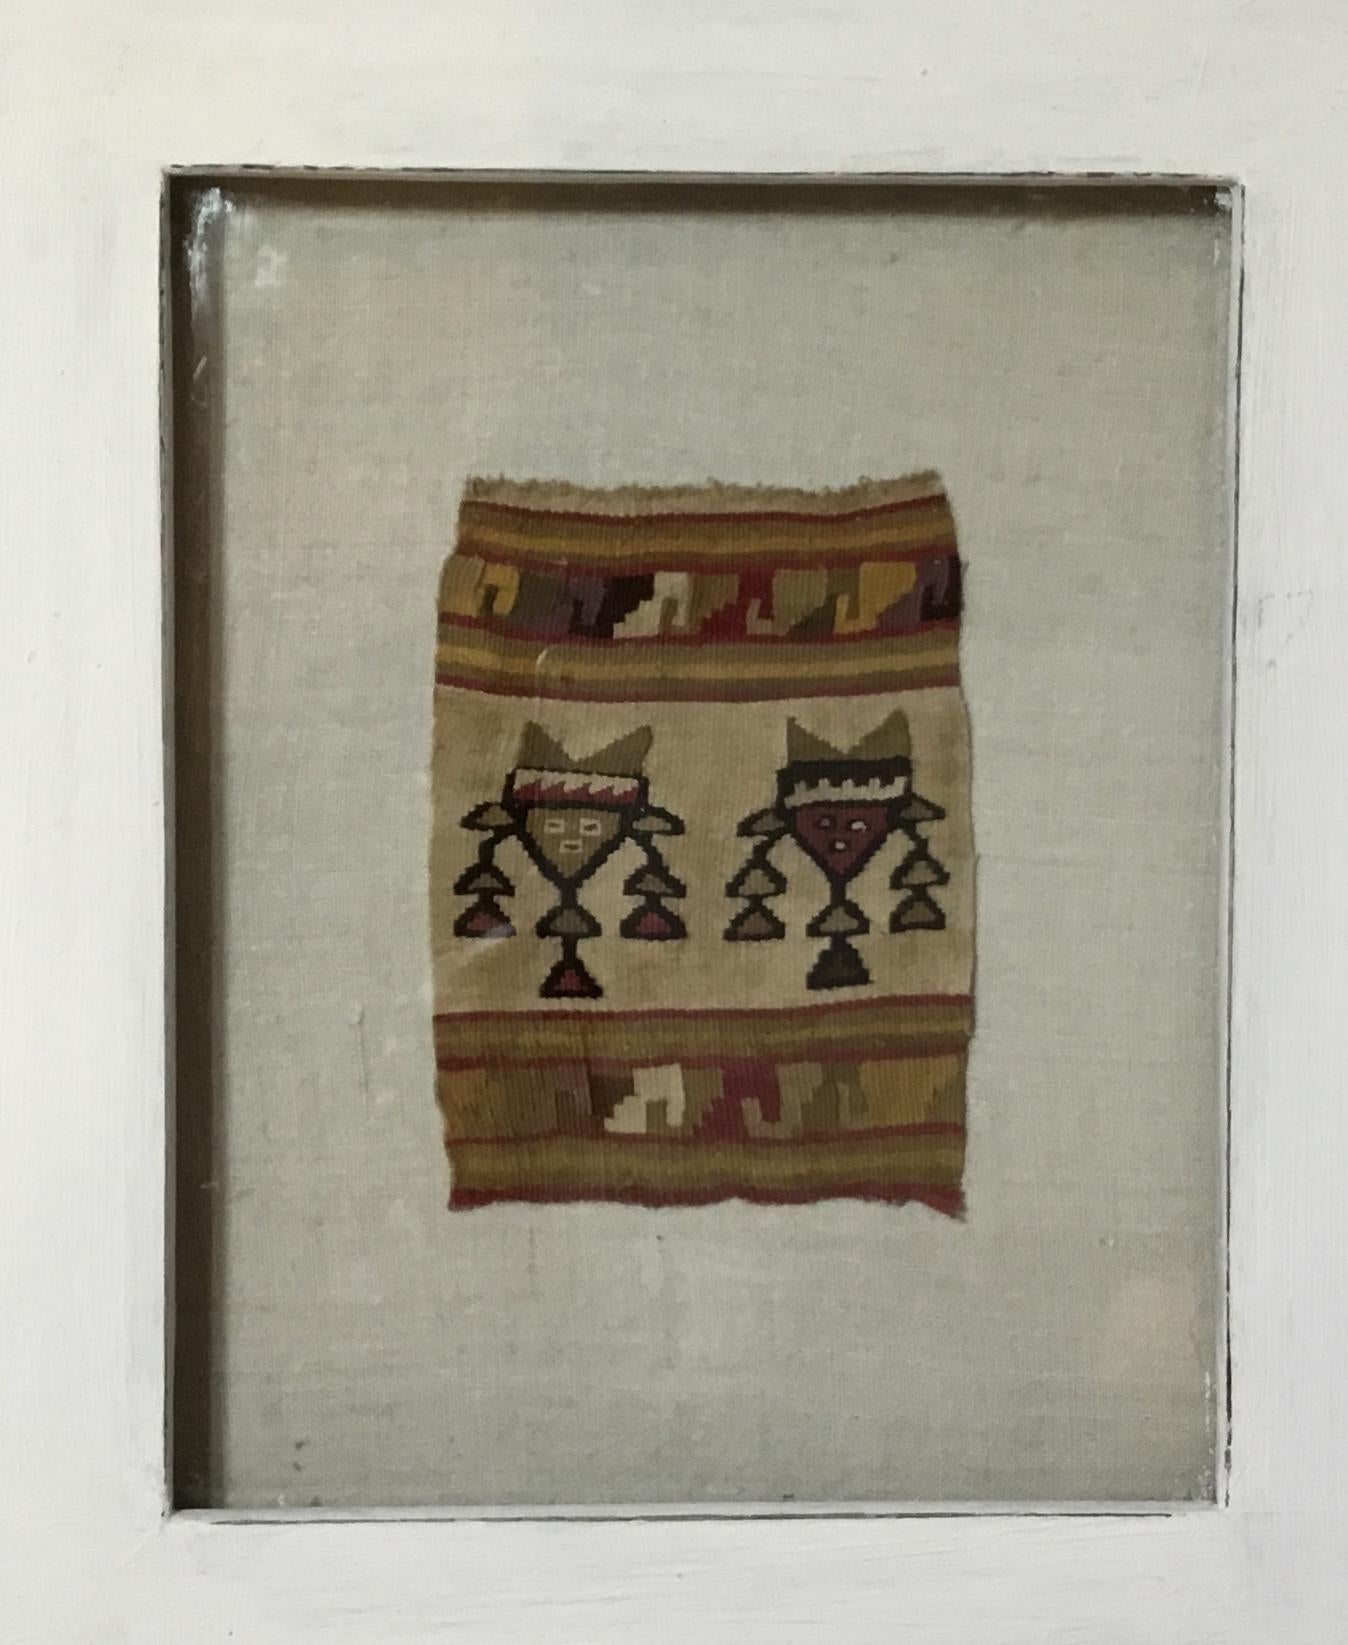 Museum quality handwoven slit tapestry pre Colombian textile fragments from Peru, featuring geometric motif of two human faces .the textile is professionally mounted on acid free Matt in a very decorative hand-painted shadow box.
Textile dated from